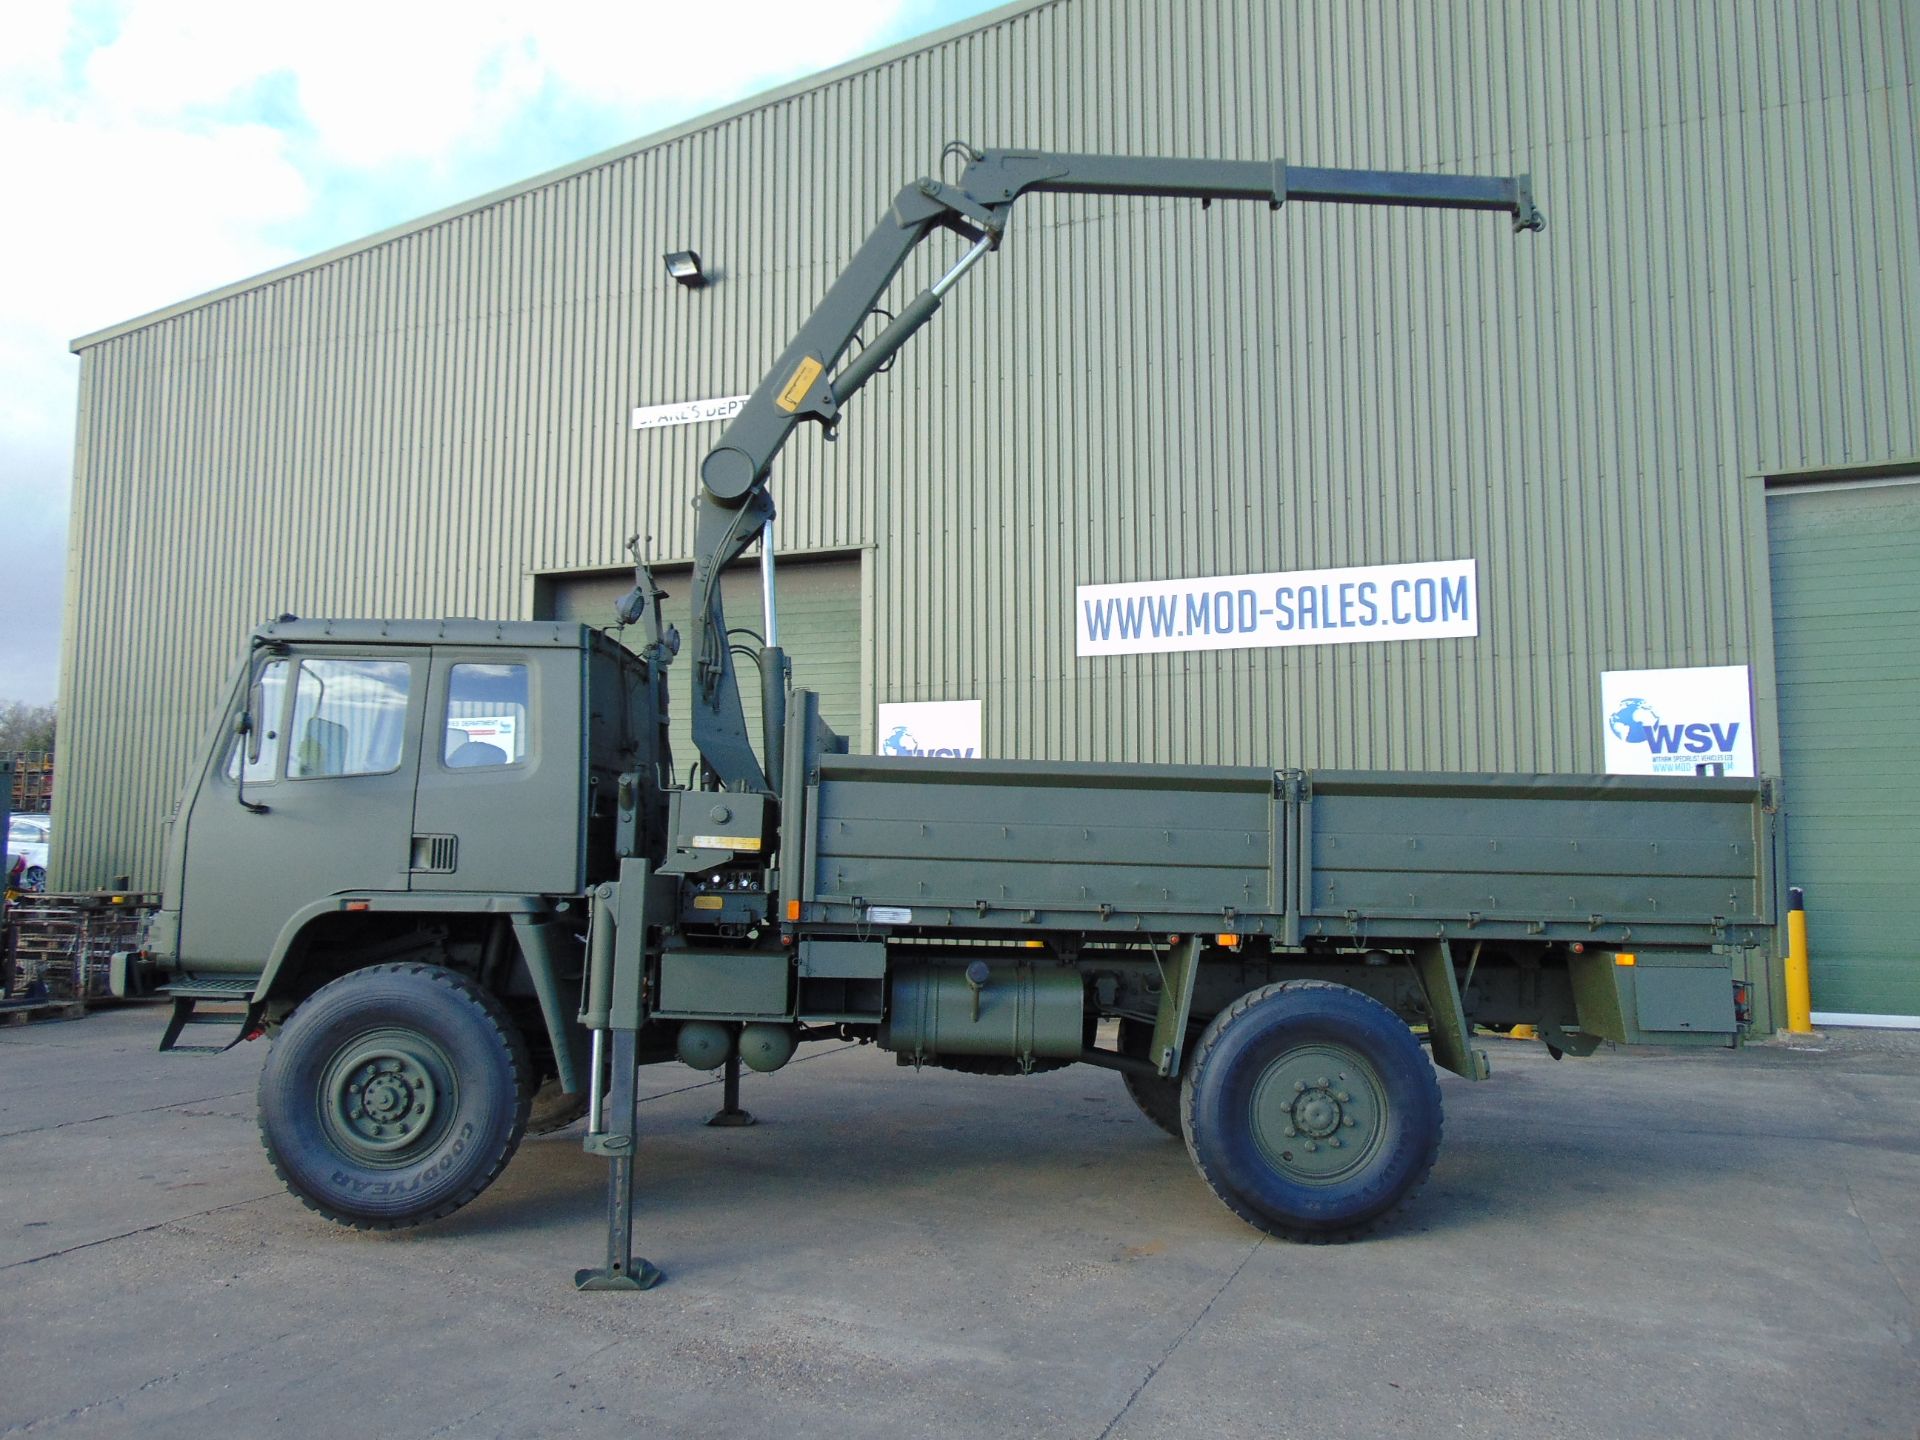 Leyland DAF 4X4 Truck complete with Atlas Crane - Image 8 of 36